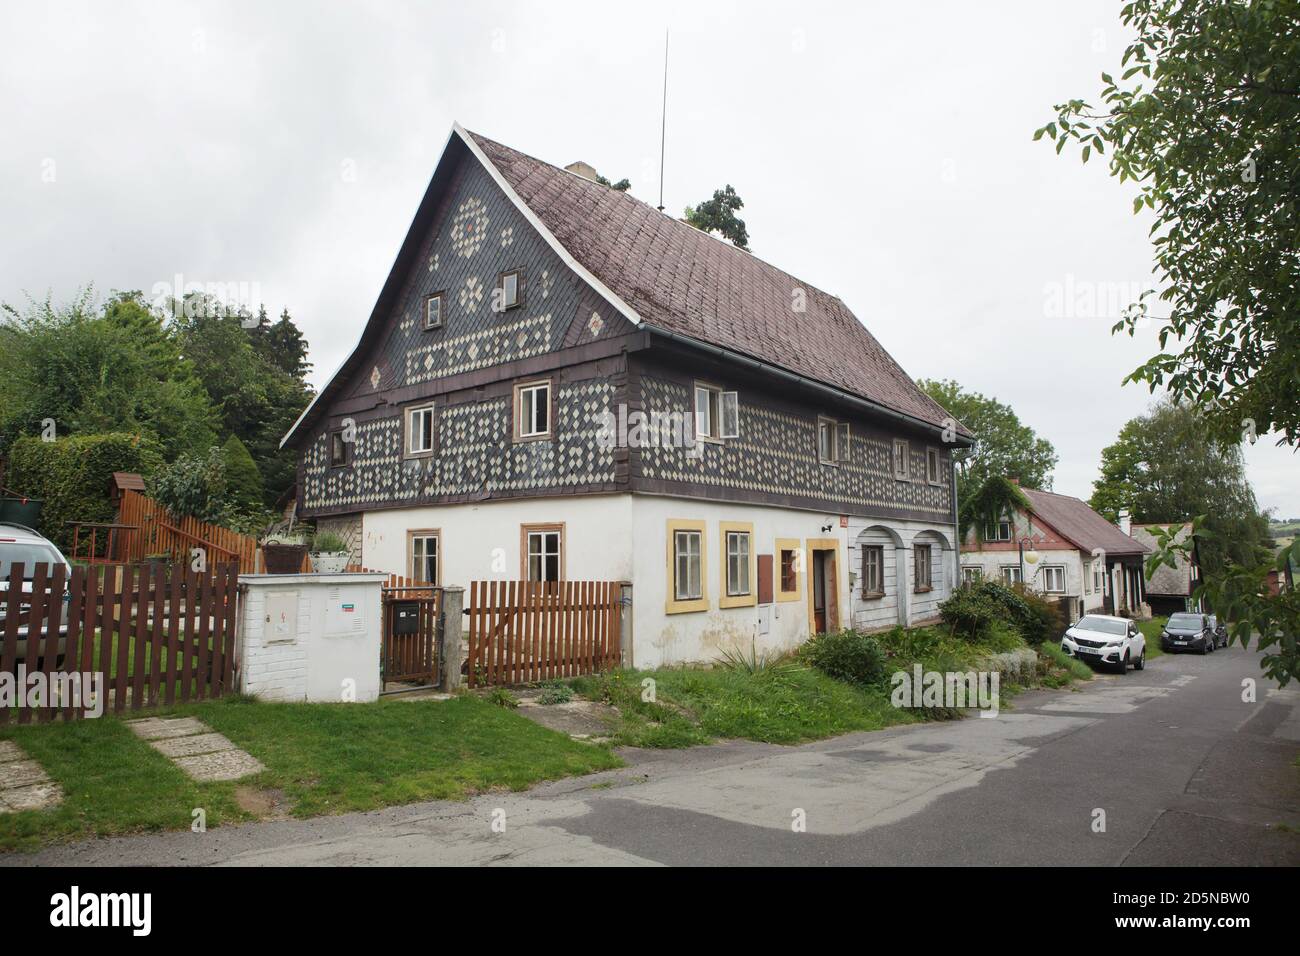 Traditional wooden house (roubenka) typical for the folk architecture in the Lusatian Mountains in Jiřetín pod Jedlovou in North Bohemia, Czech Republic. Stock Photo